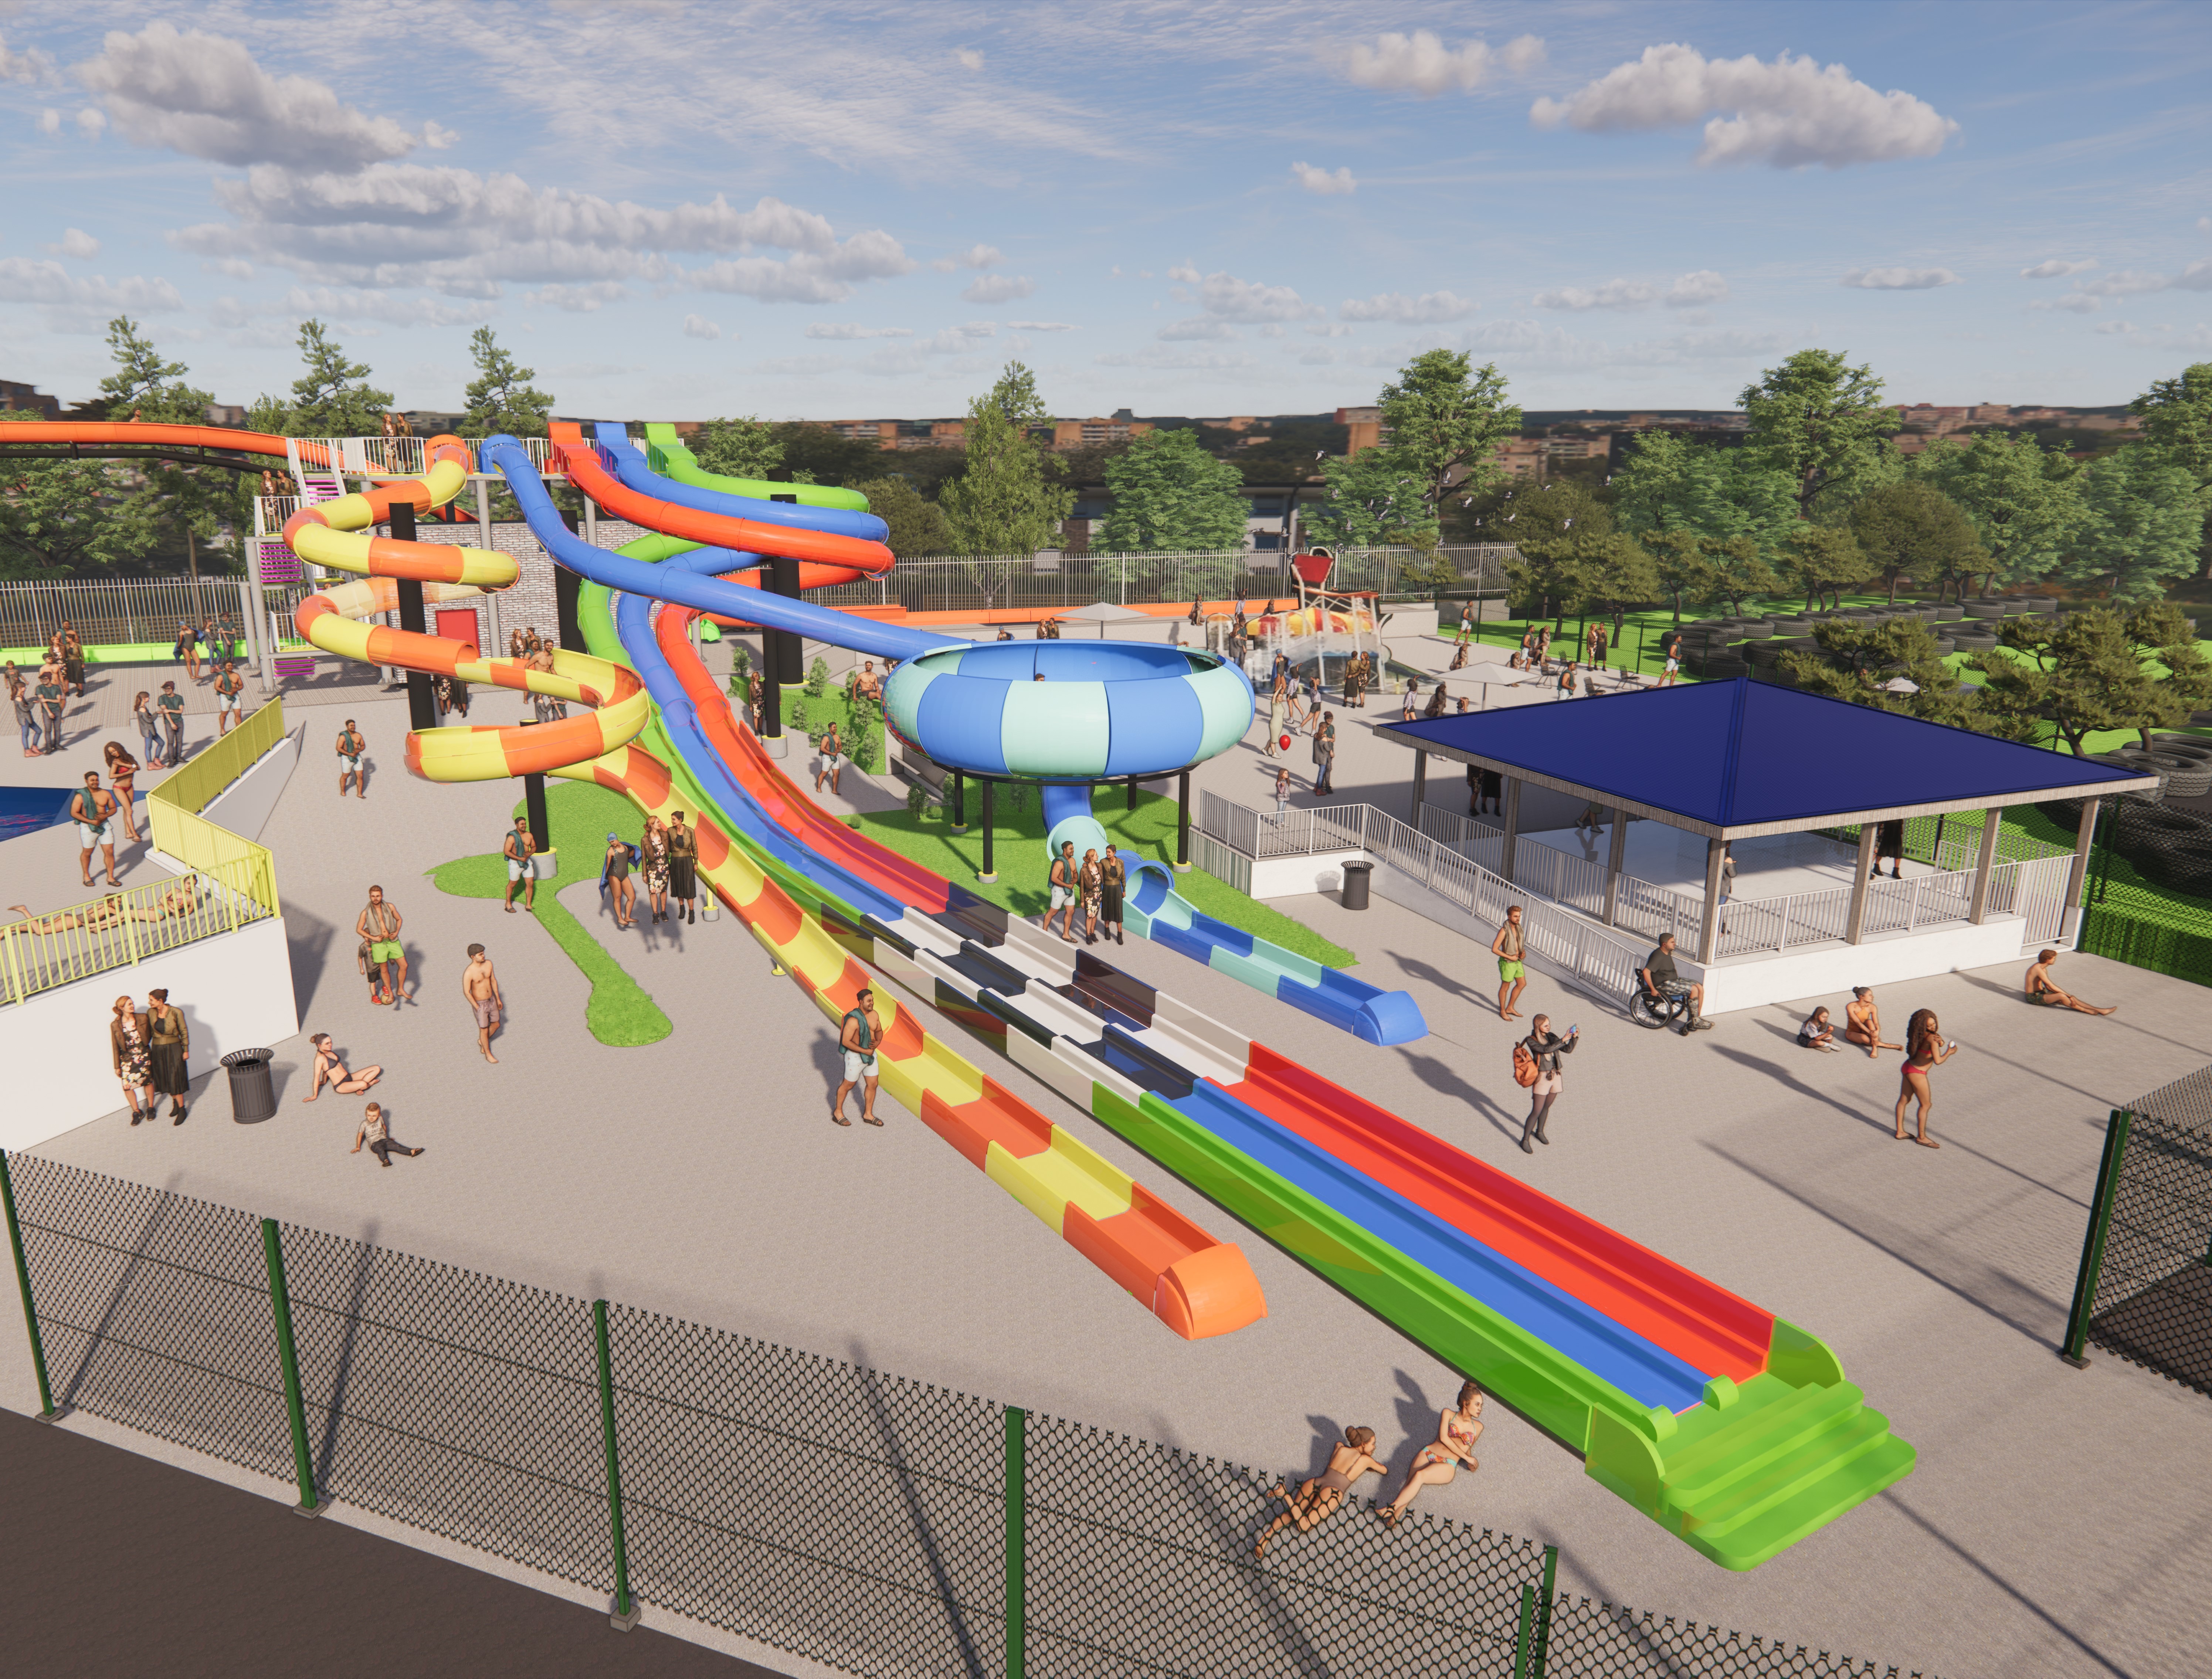 $5M waterpark upgrades, additions mark largest-ever investment at East Park